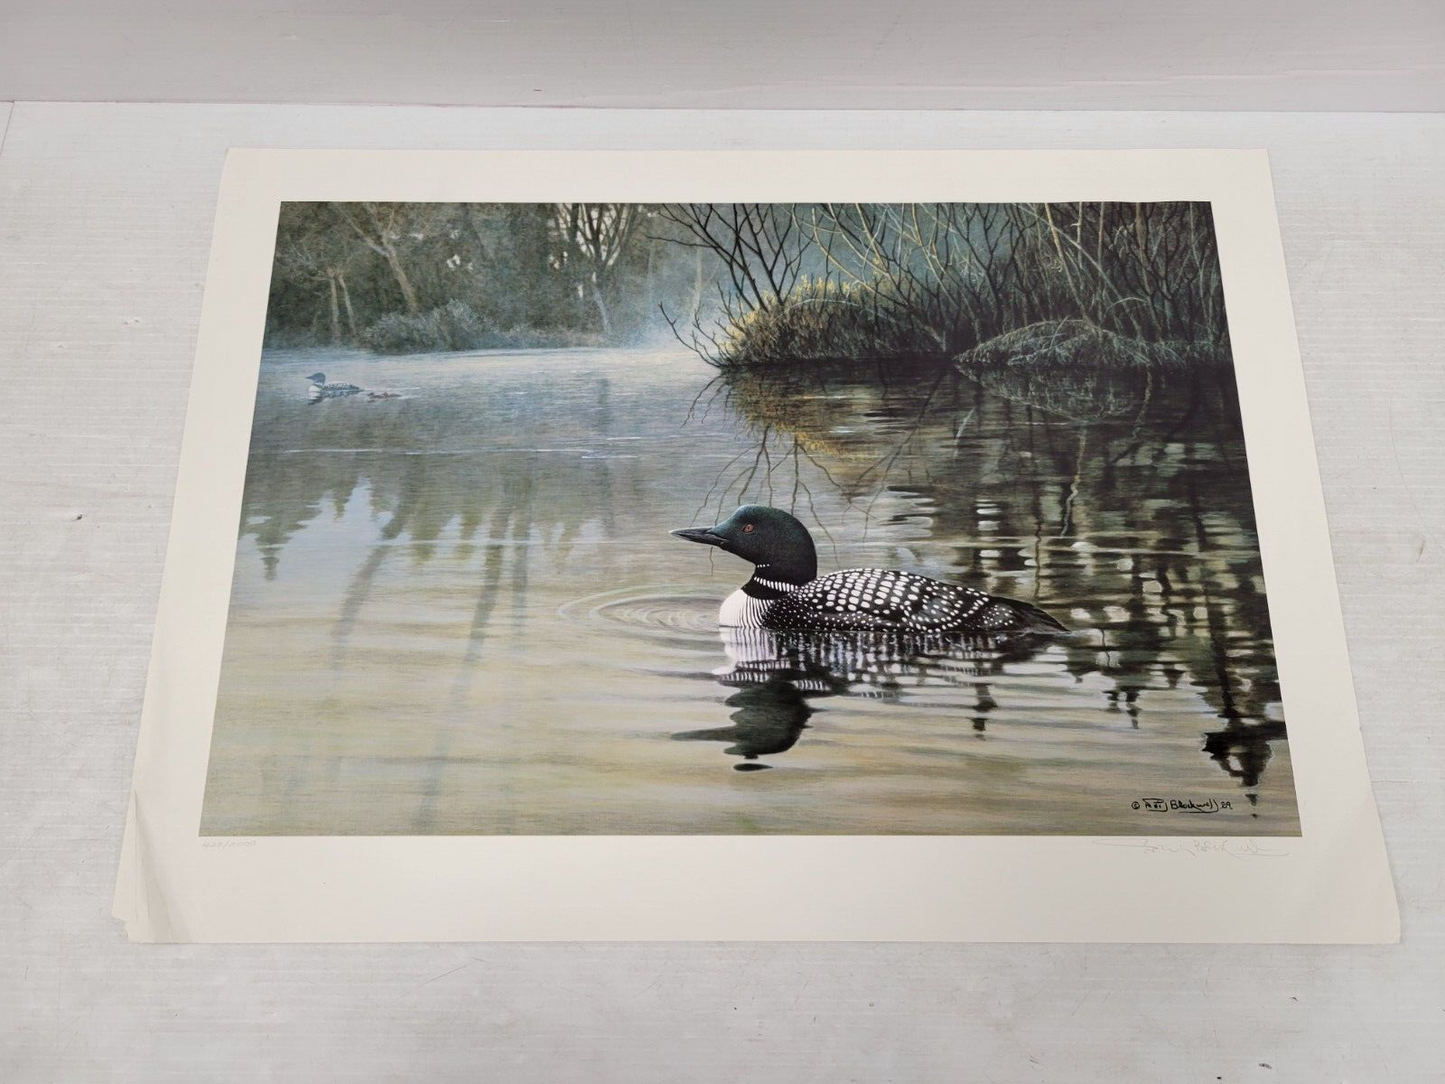 (I-34692) Wildlife In Jeopardy Serenity - Common Loon Nell Blackwell